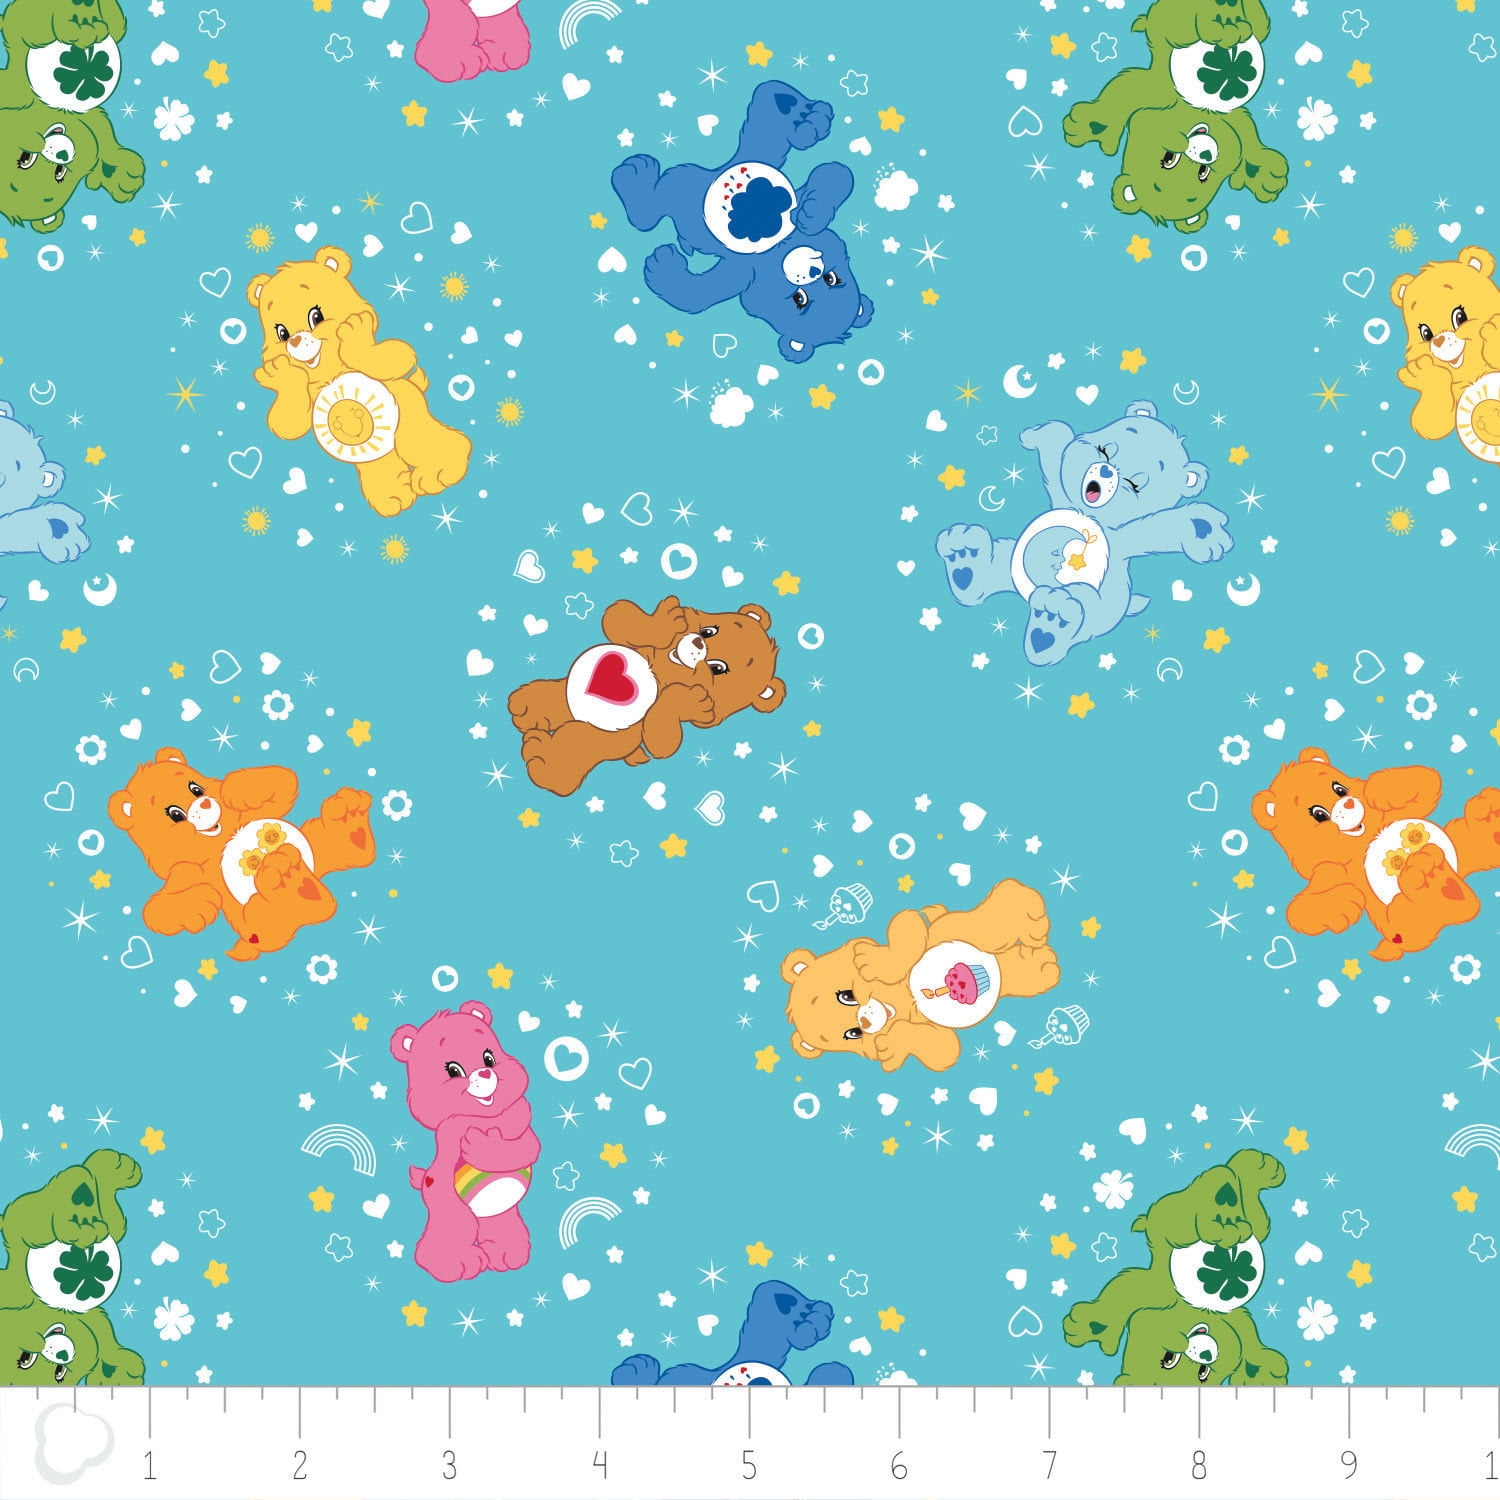 Details about   Care Bears Cotton Fabric Design a standard handcrafted pillowcase 